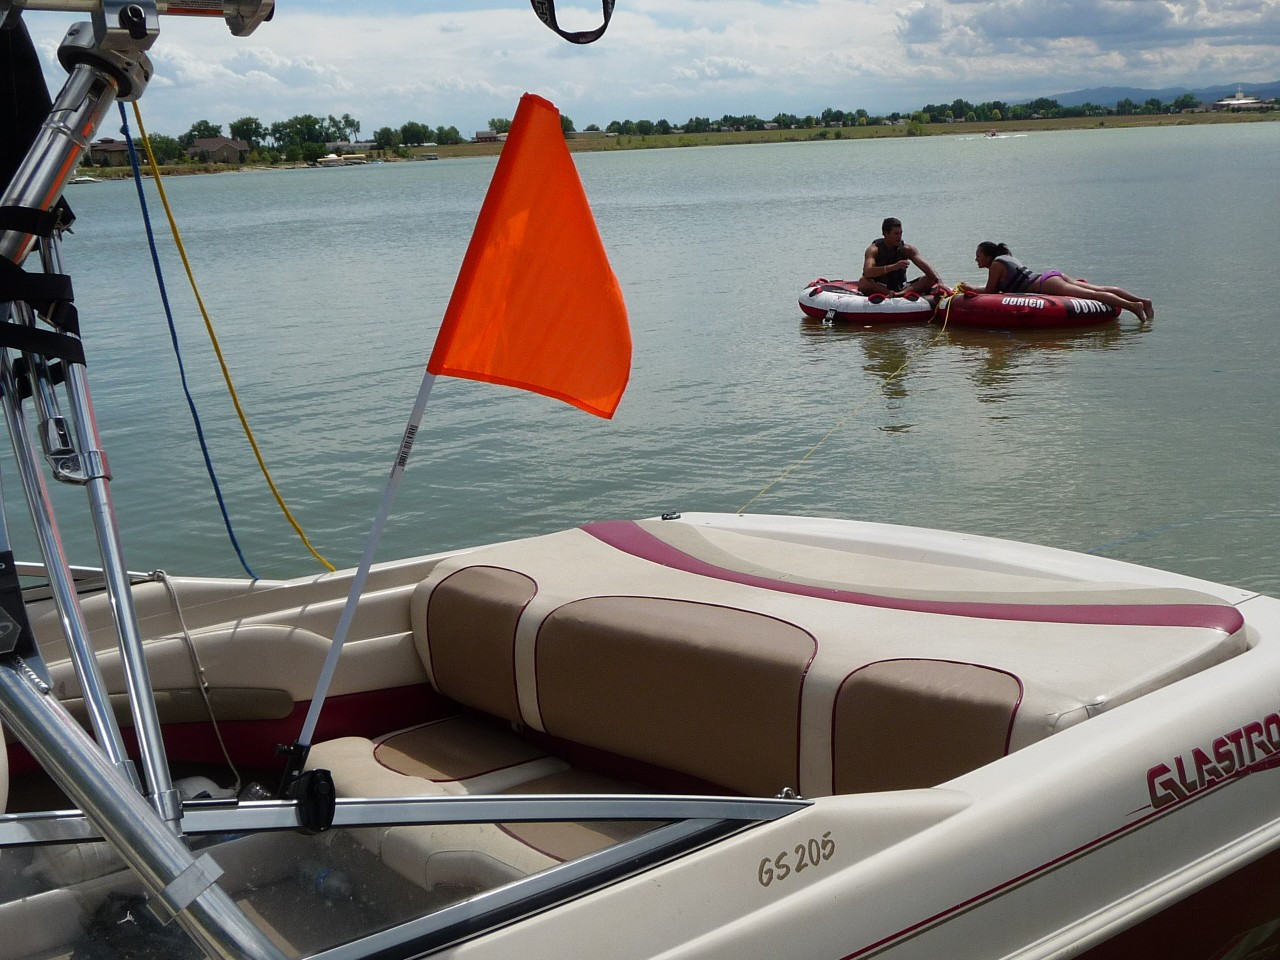 Pontoon Boat Flag Holder. Orange Safety Flag Included. Tired of Holding The Skier Down Flag? Just Clamp The Flag Buddy to Your Boat and Rotate It Up